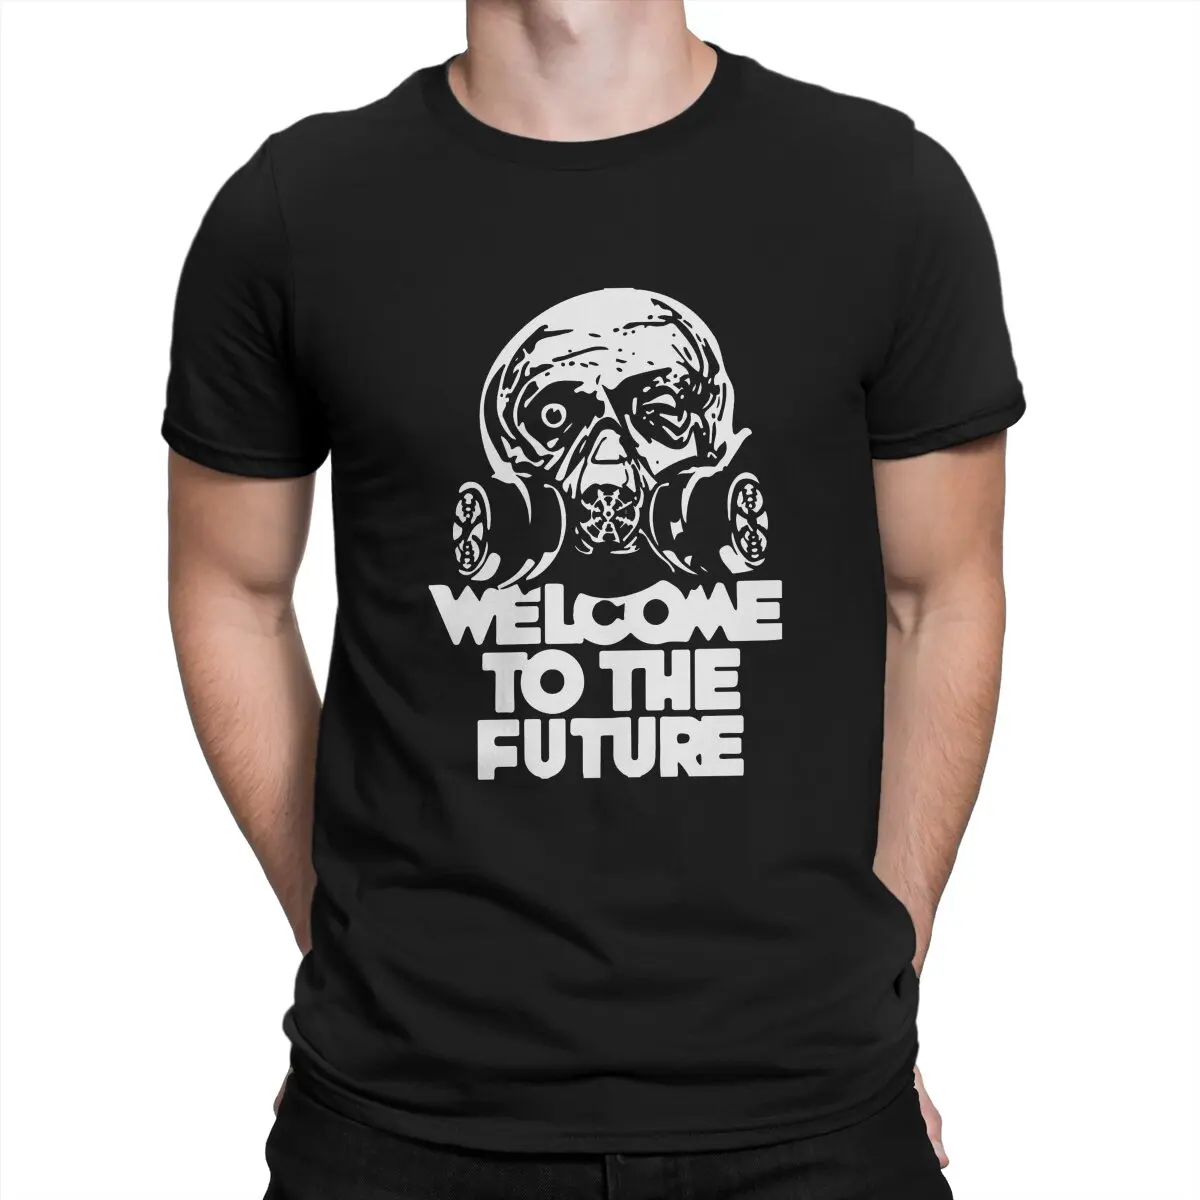 

The Terminator Welcome to the Future1 Tshirt Graphic Men Tops Vintage Grunge Summer Short Sleeve Harajuku T Shirt